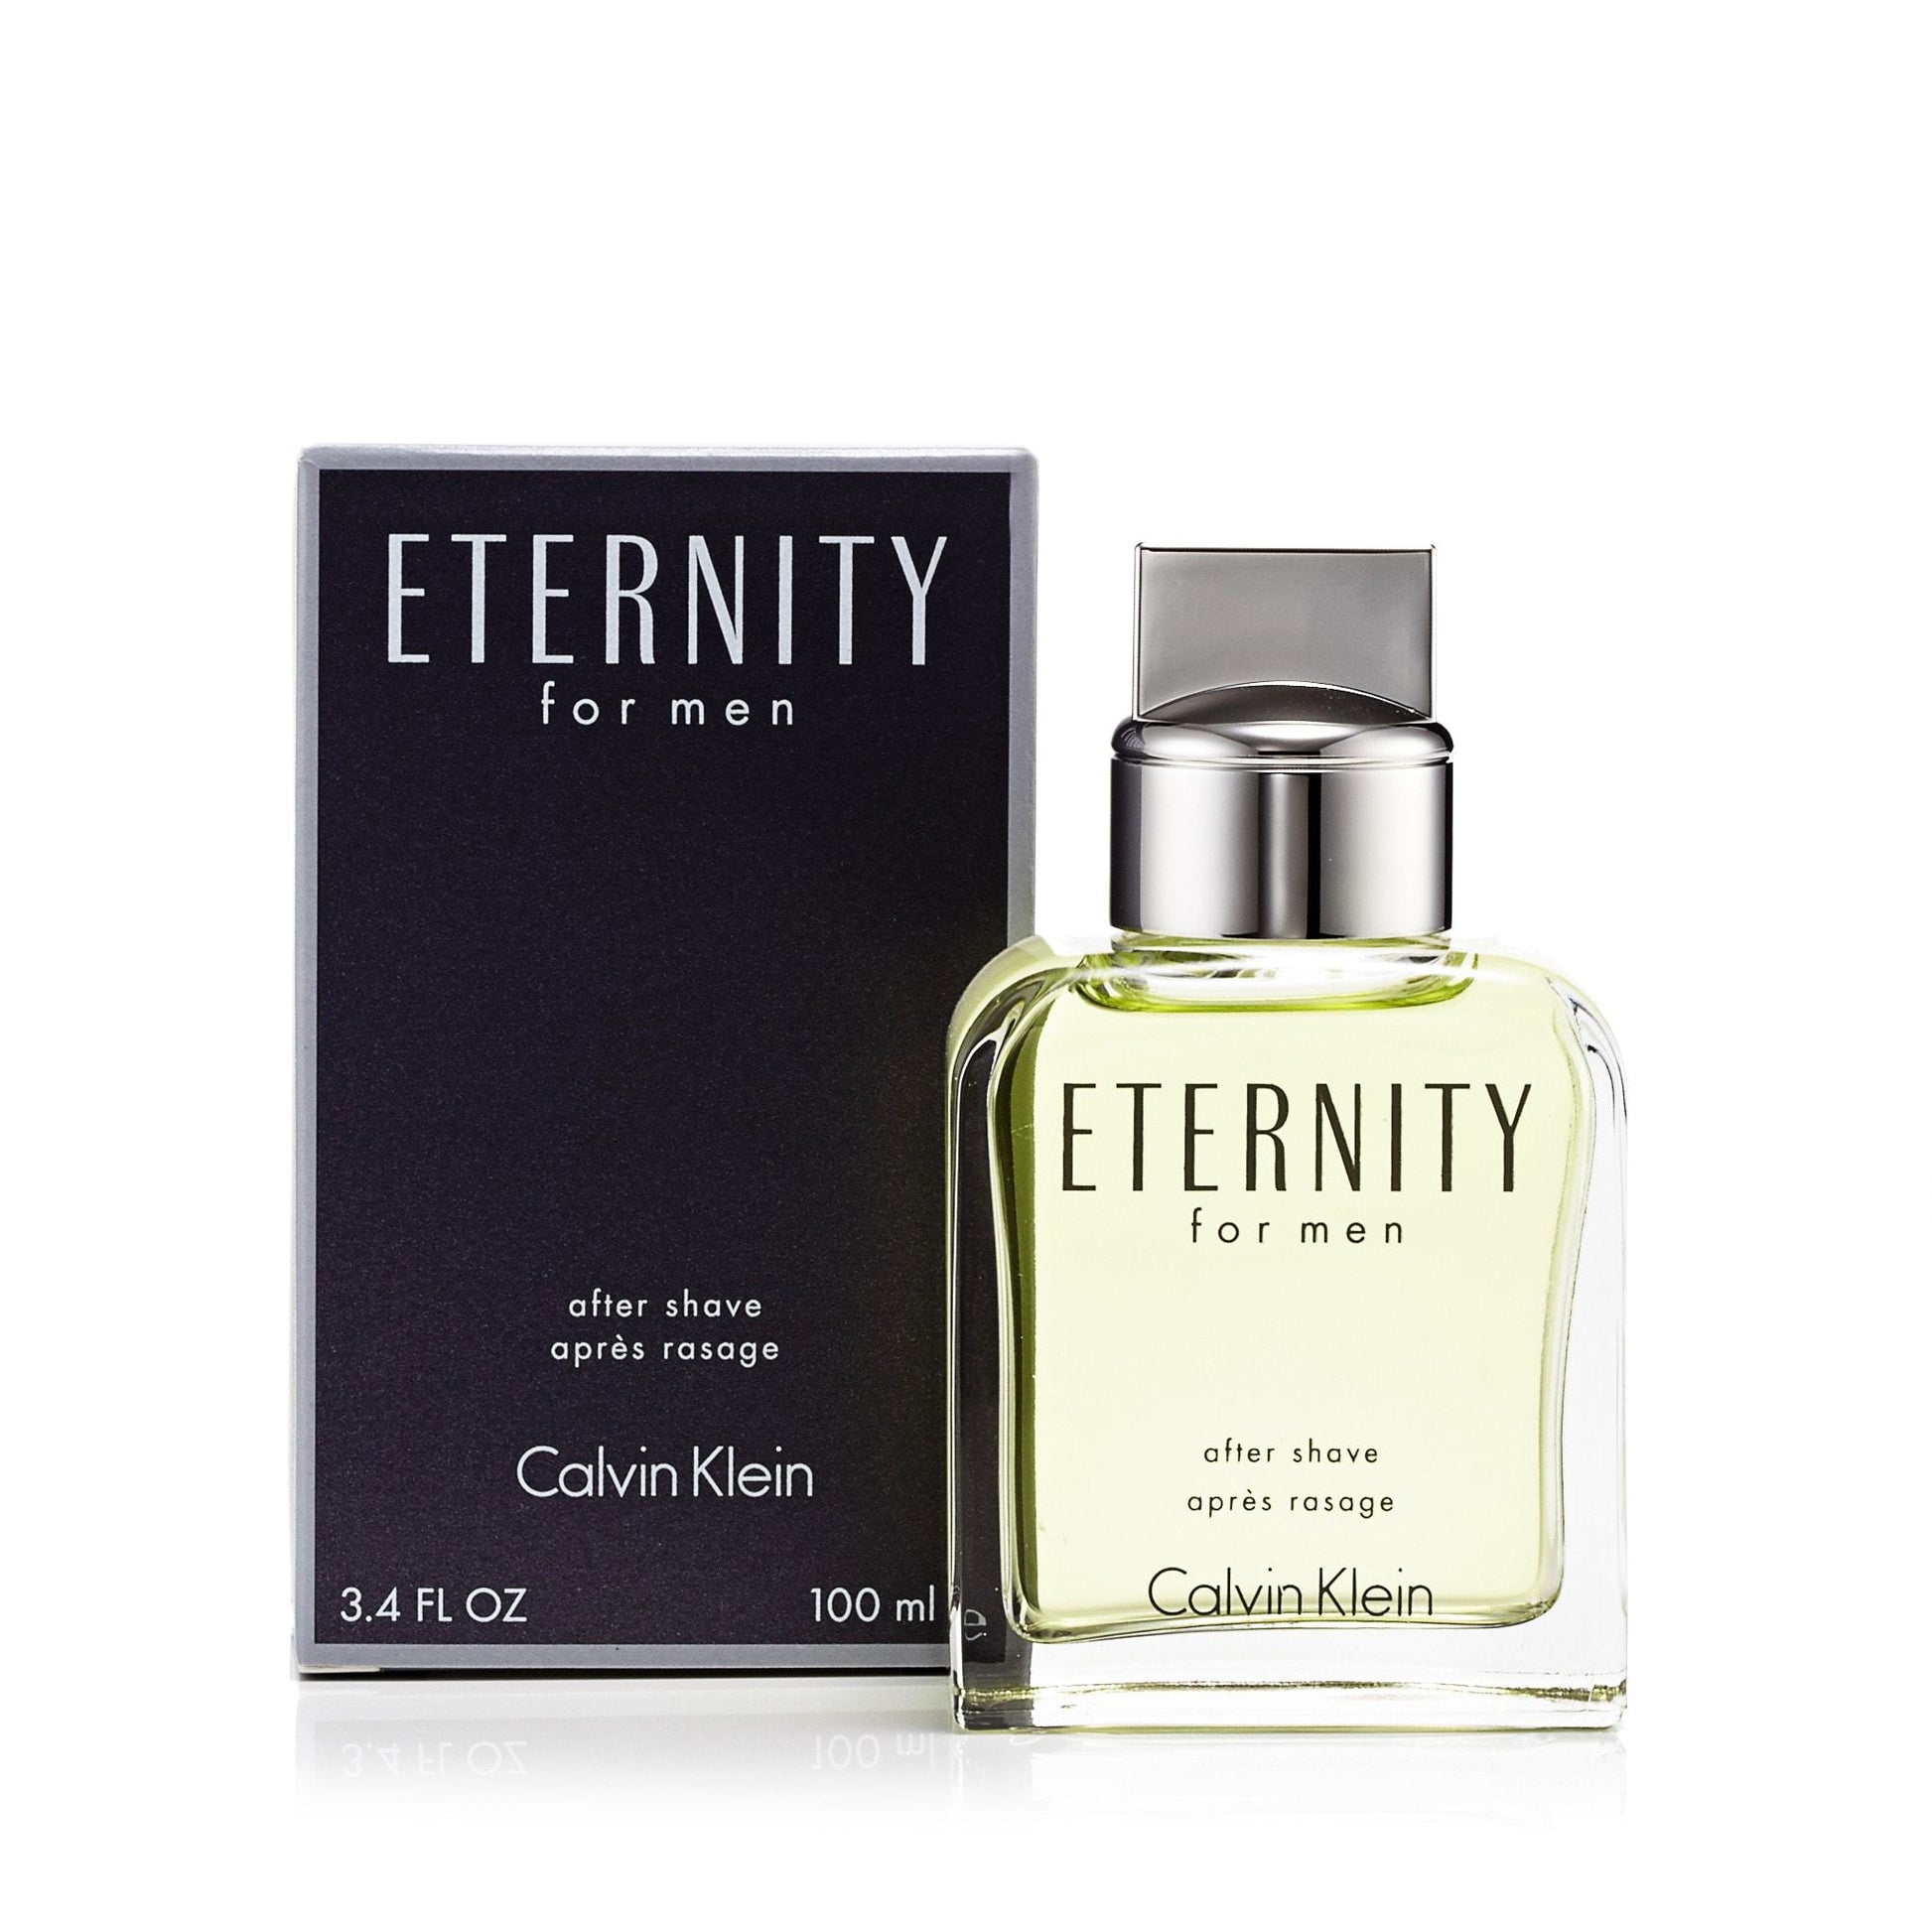 Eternity After Shave for Men by Calvin Klein, Product image 2